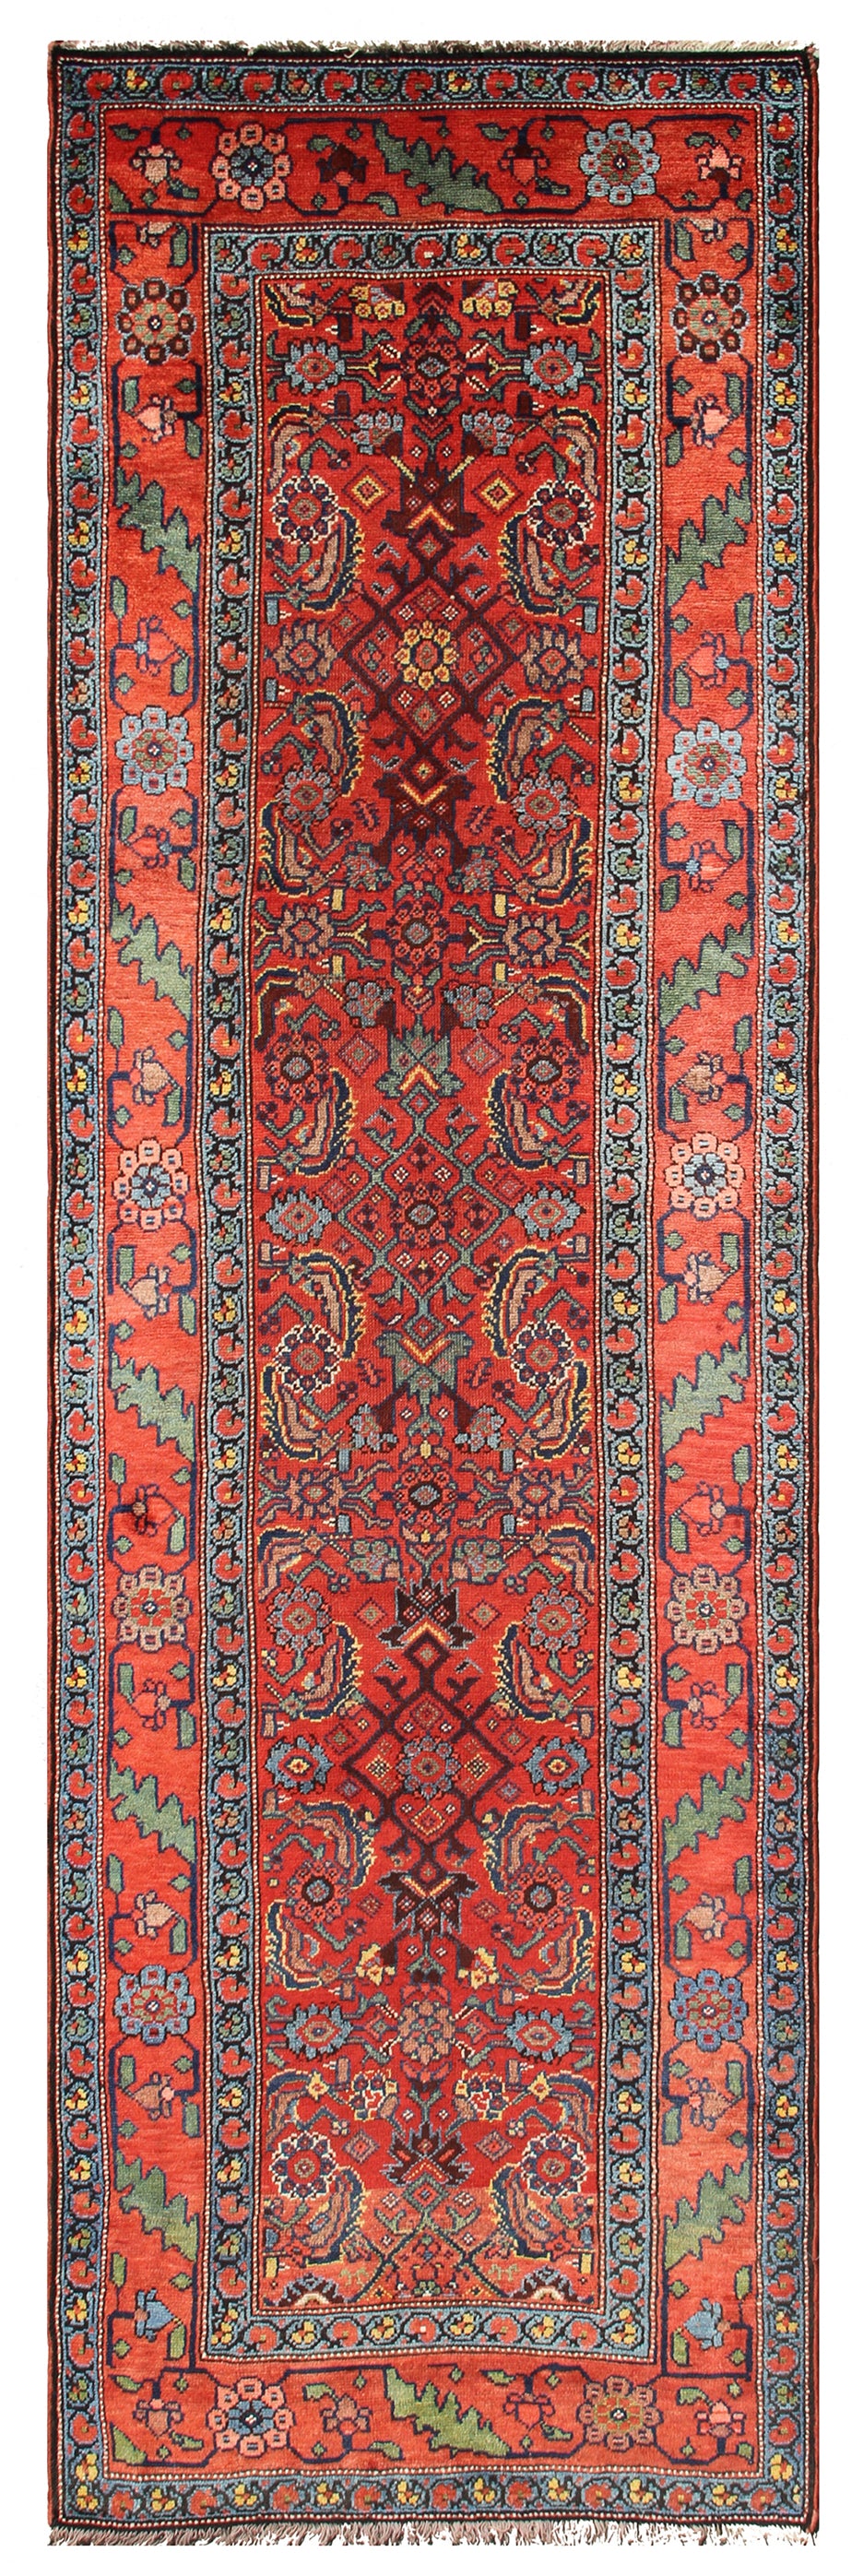 4'x11' Antique And Semi Antique Persian Malayer Runner